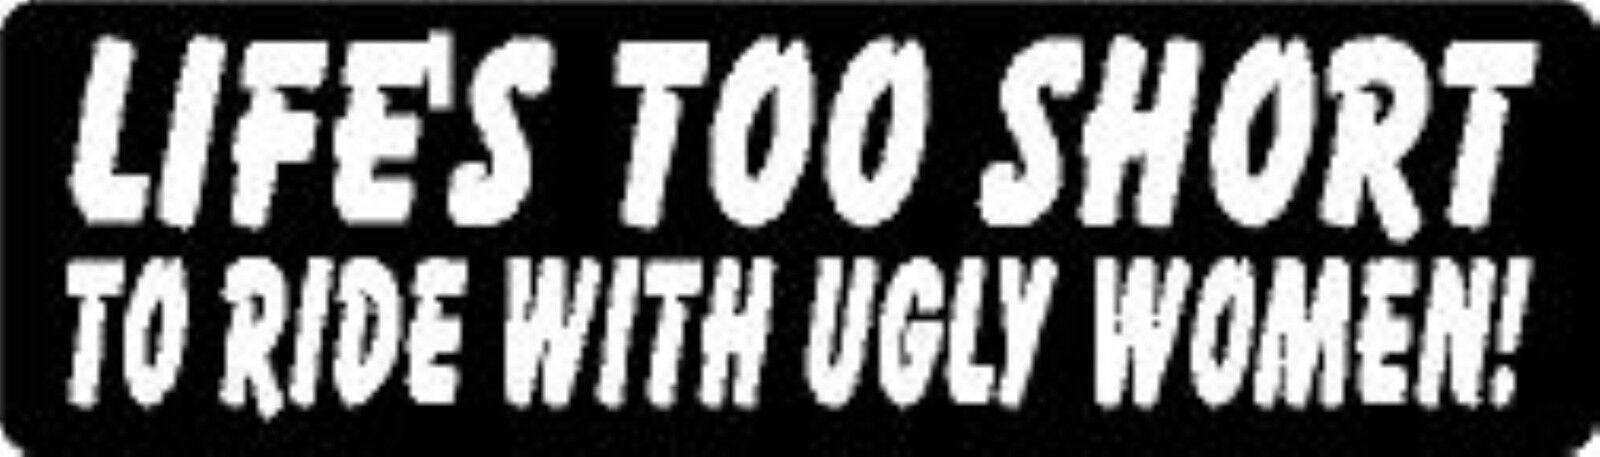 LIFE\'S TOO SHORT TO RIDE WITH UGLY WOMEN  HELMET STICKER